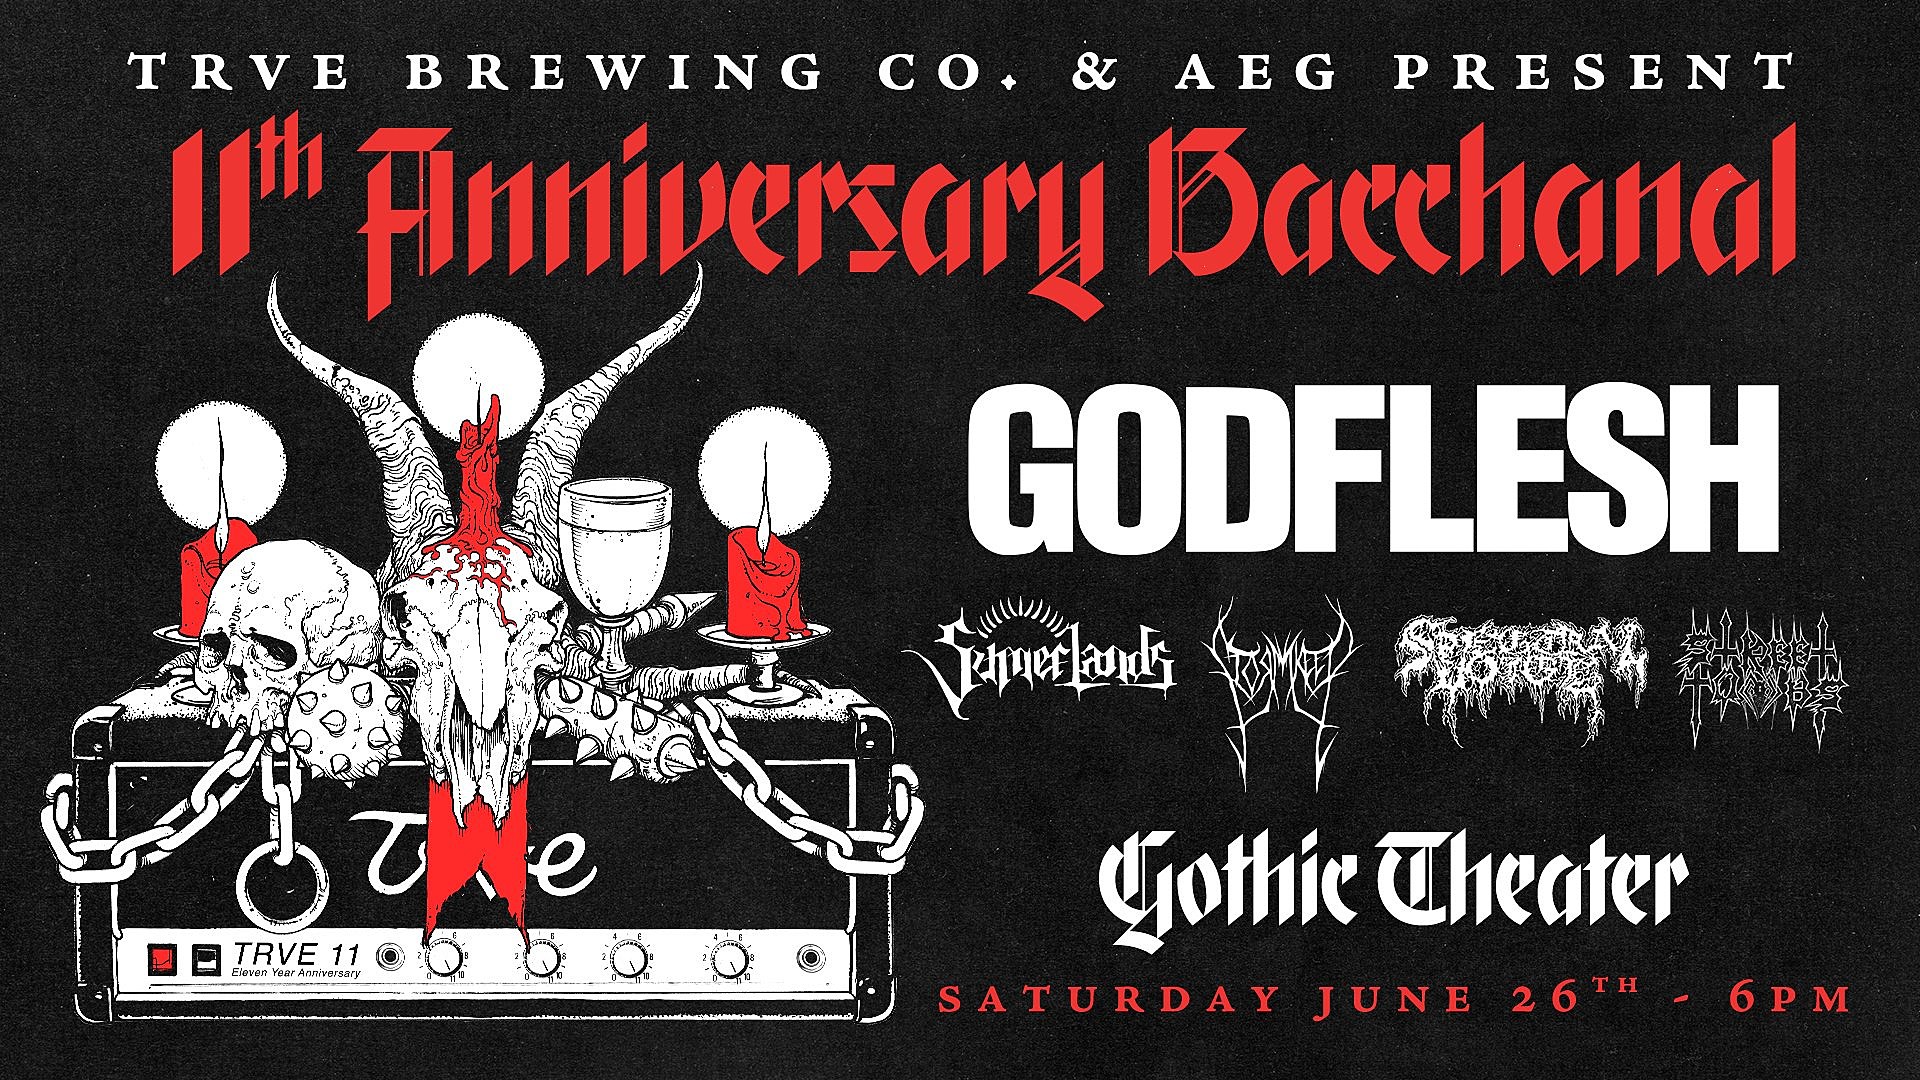 The Trve Anniversary Bacchanal Brings Metal to the Masses Once Again